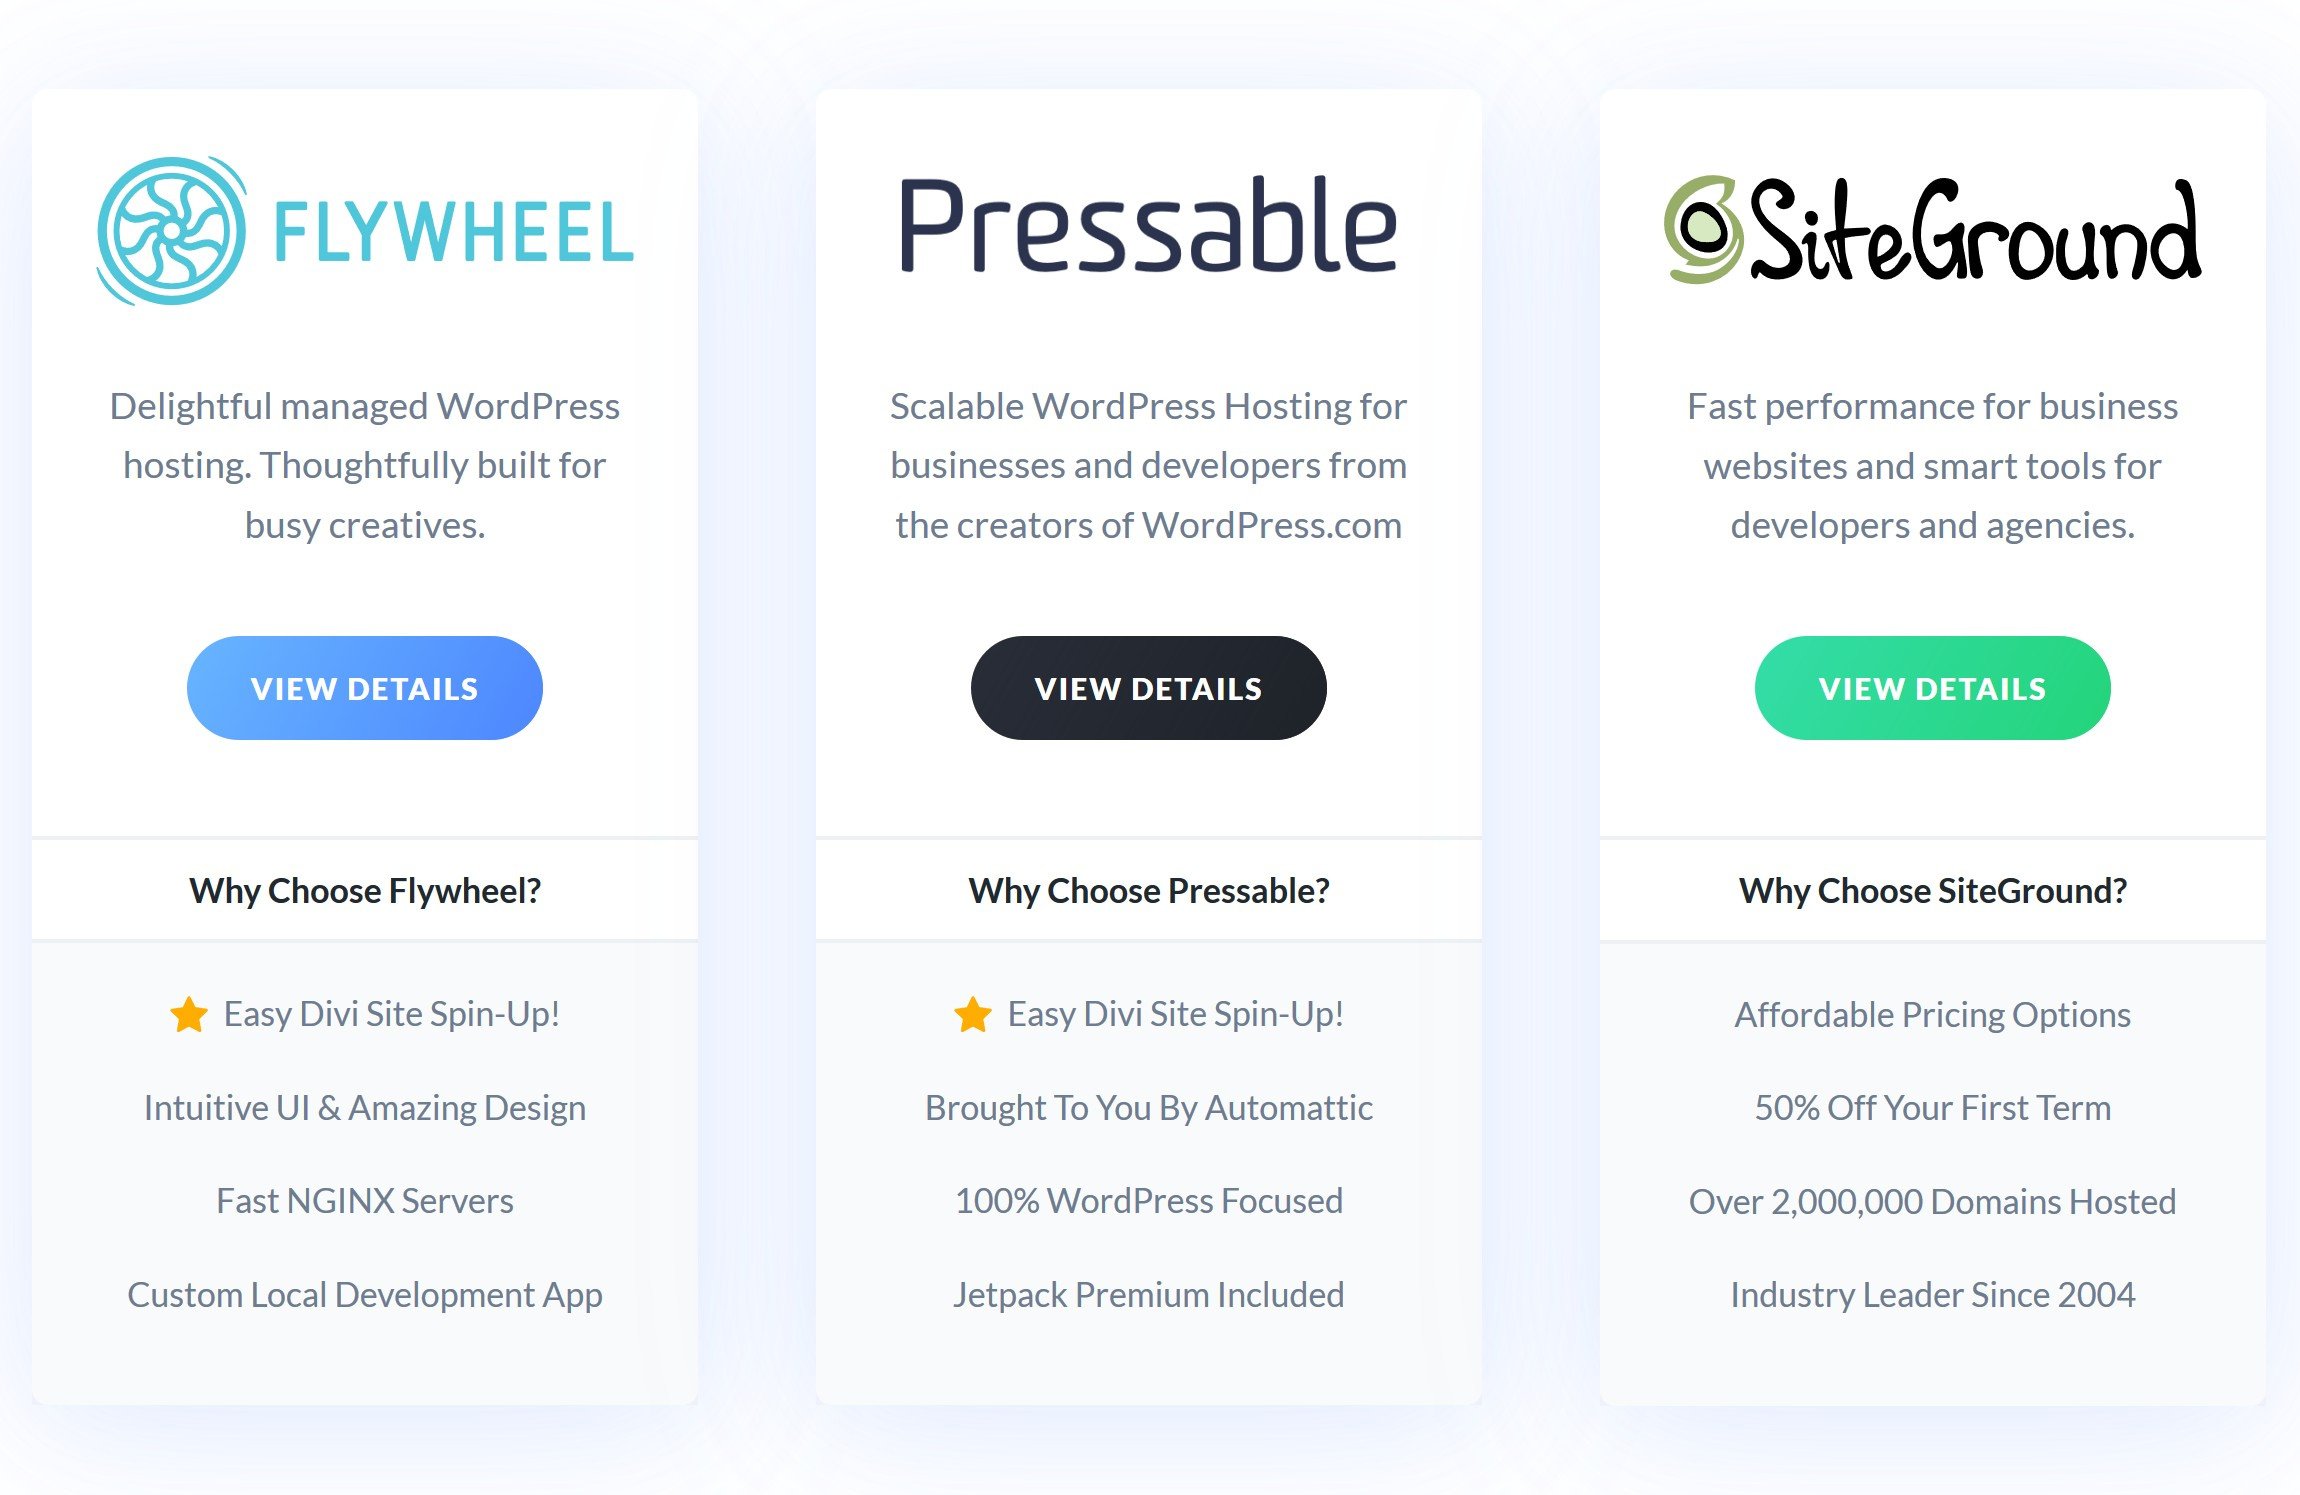 Divi Hosting supports Flywheel, Pressable, and SiteGround